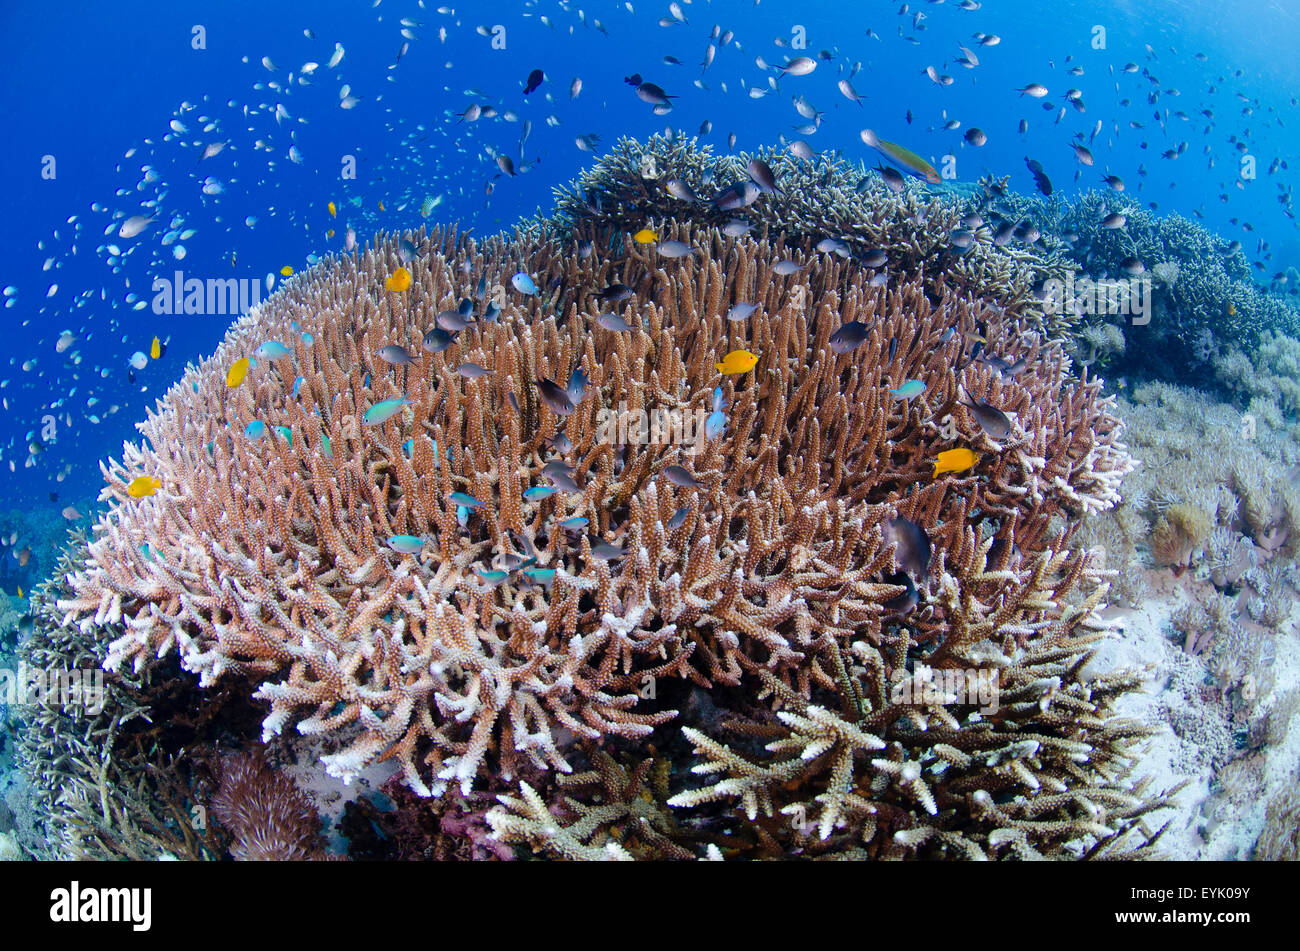 Hard corals, Acropora sp., and small tropical fish in the shallows of Batu Monco divesite, Komodo National Park, Indonesia Stock Photo